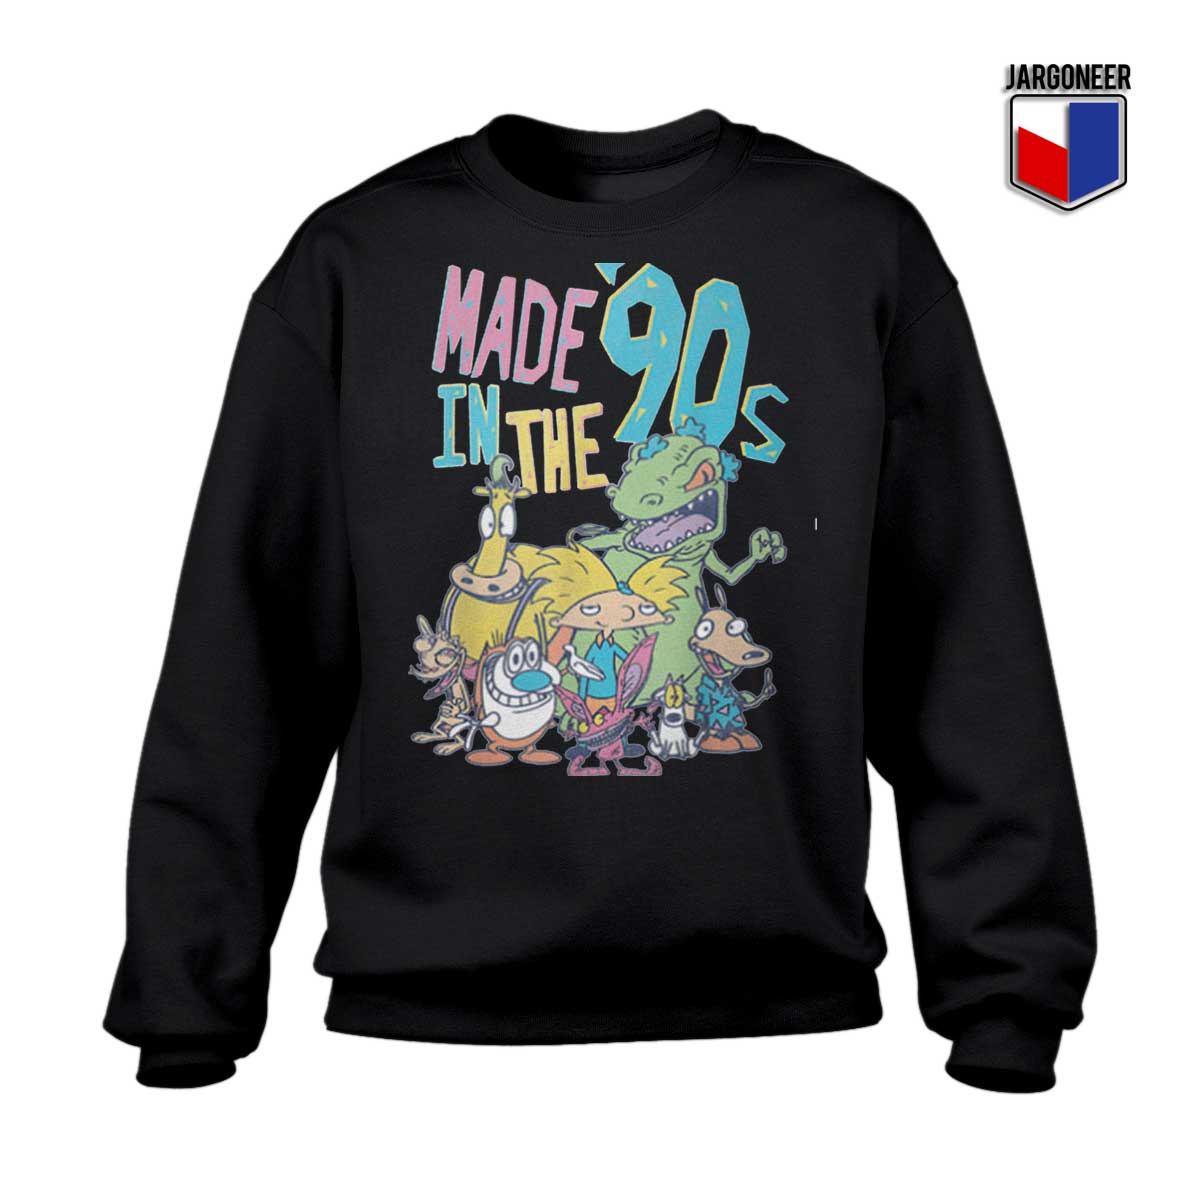 Made In The 90s Sweatshirt - Shop Unique Graphic Cool Shirt Designs